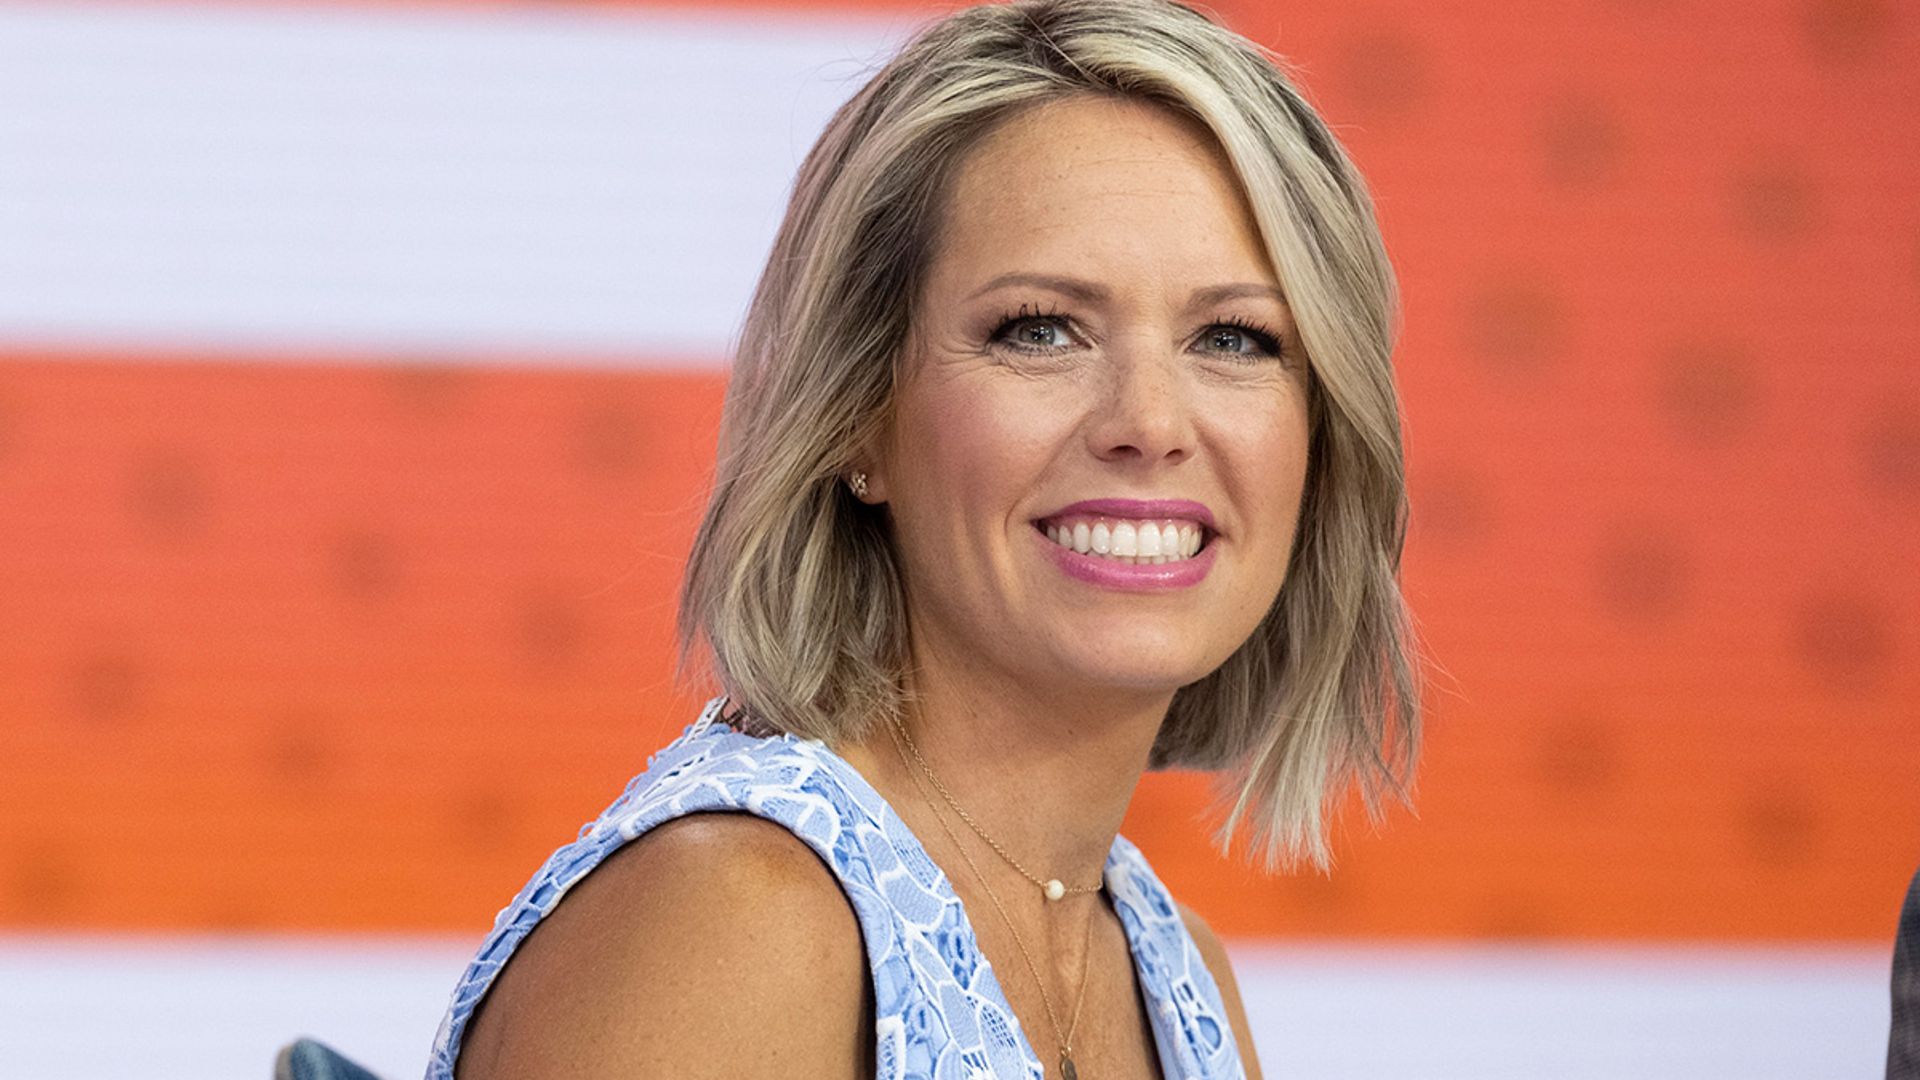 Dylan Dreyer's messy kitchen inside NYC home is applauded by fellow parents